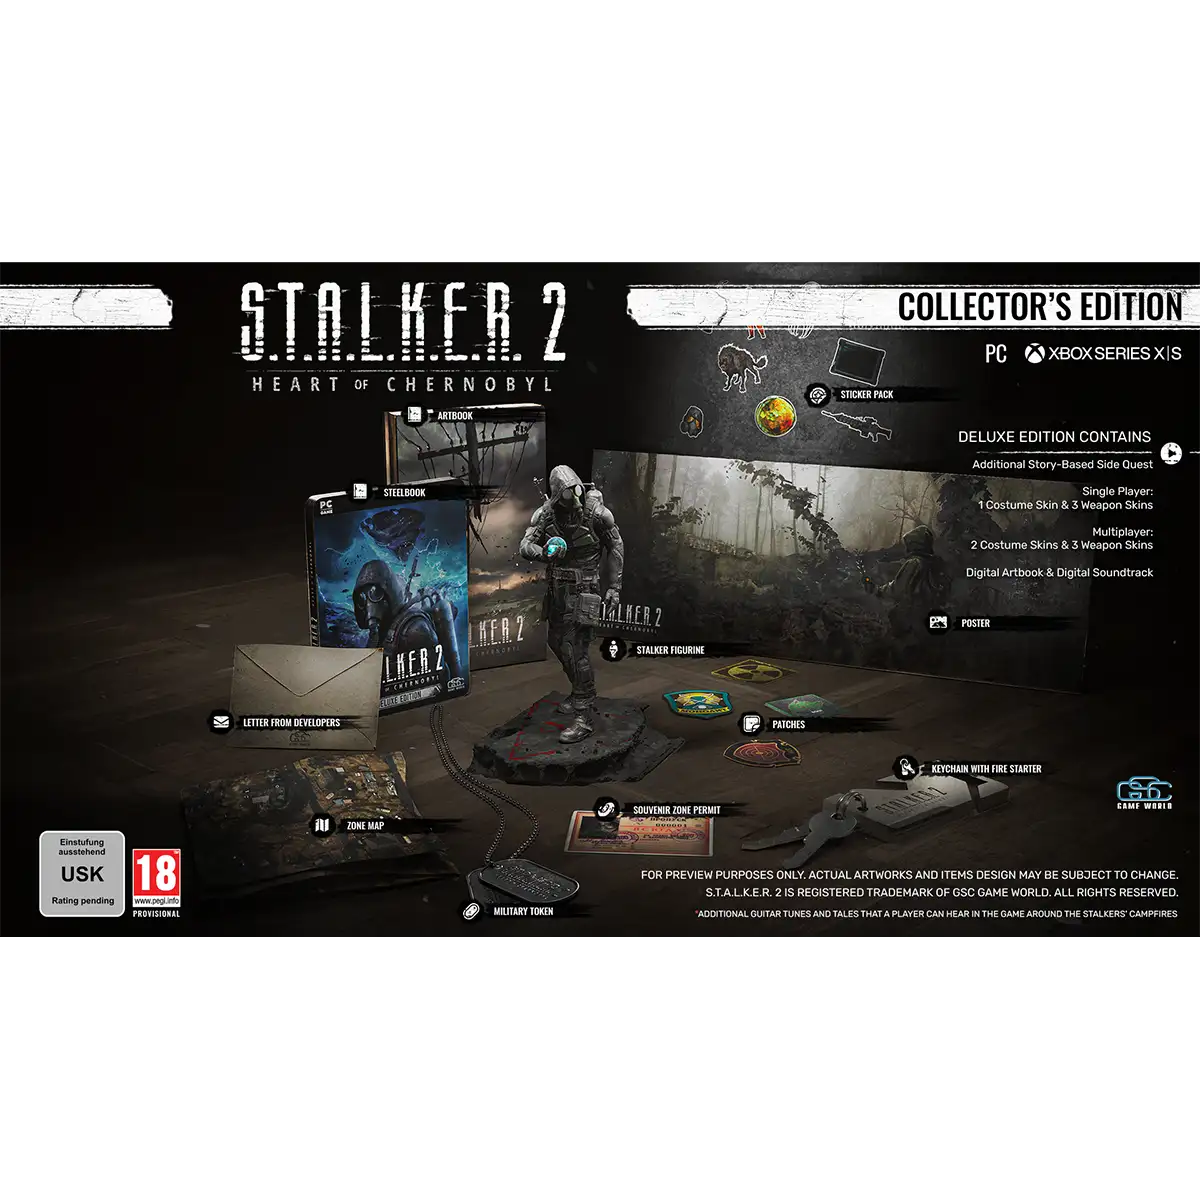 S.T.A.L.K.E.R. 2: Heart of Chornobyl Collector's Edition (XSRX) Thumbnail 2